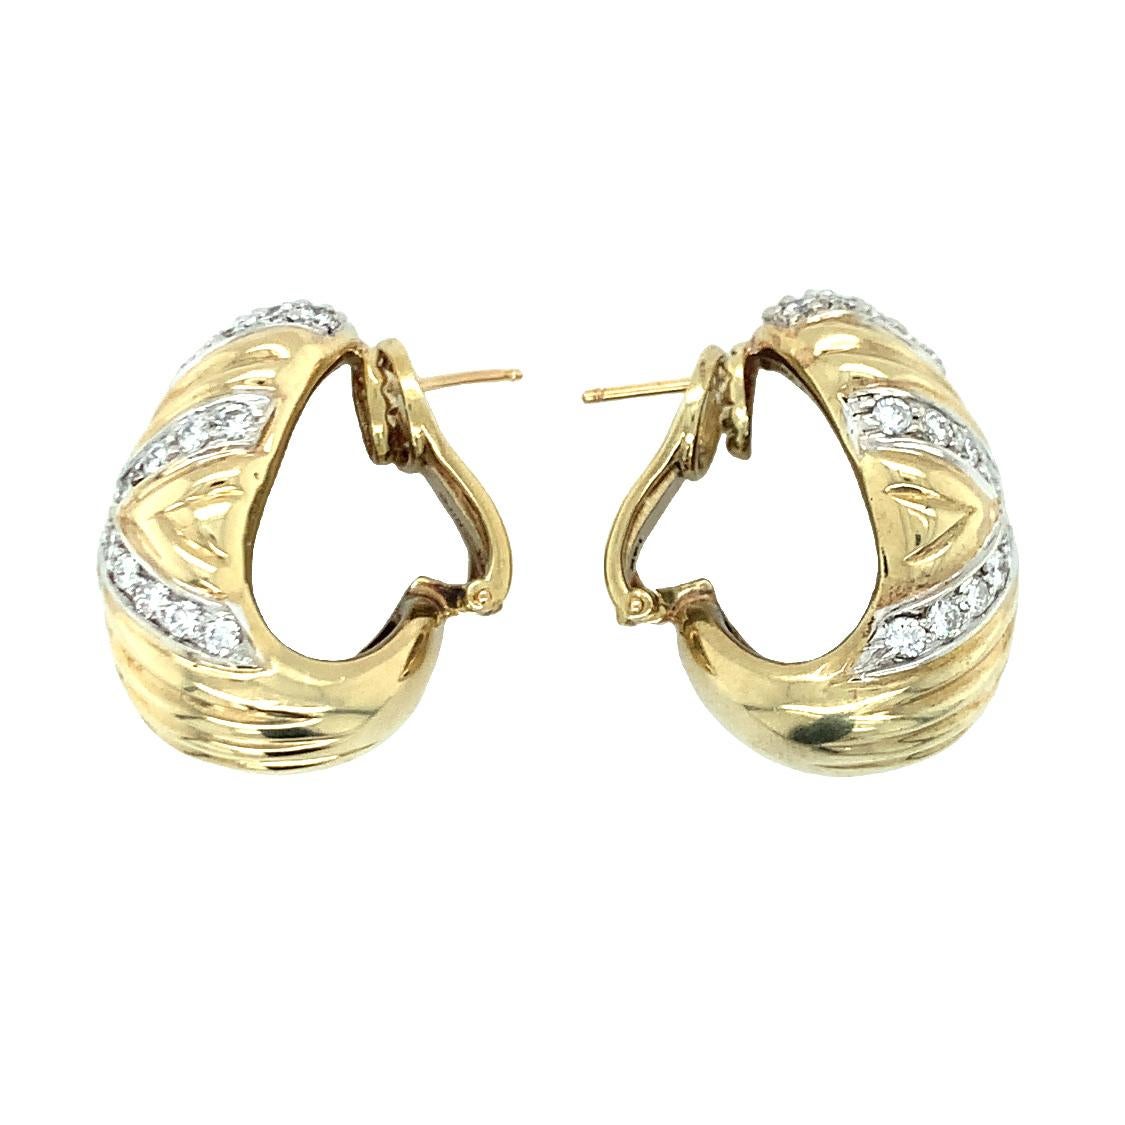 One pair of half-hoop diamond 14K yellow gold earrings featuring 56 round brilliant cut diamonds totaling 3 ct. With posts and backs and circa 1970s.

Pretty, brilliant, bright.

Additional information:
Metal: 14K yellow gold
Gemstone: Diamonds